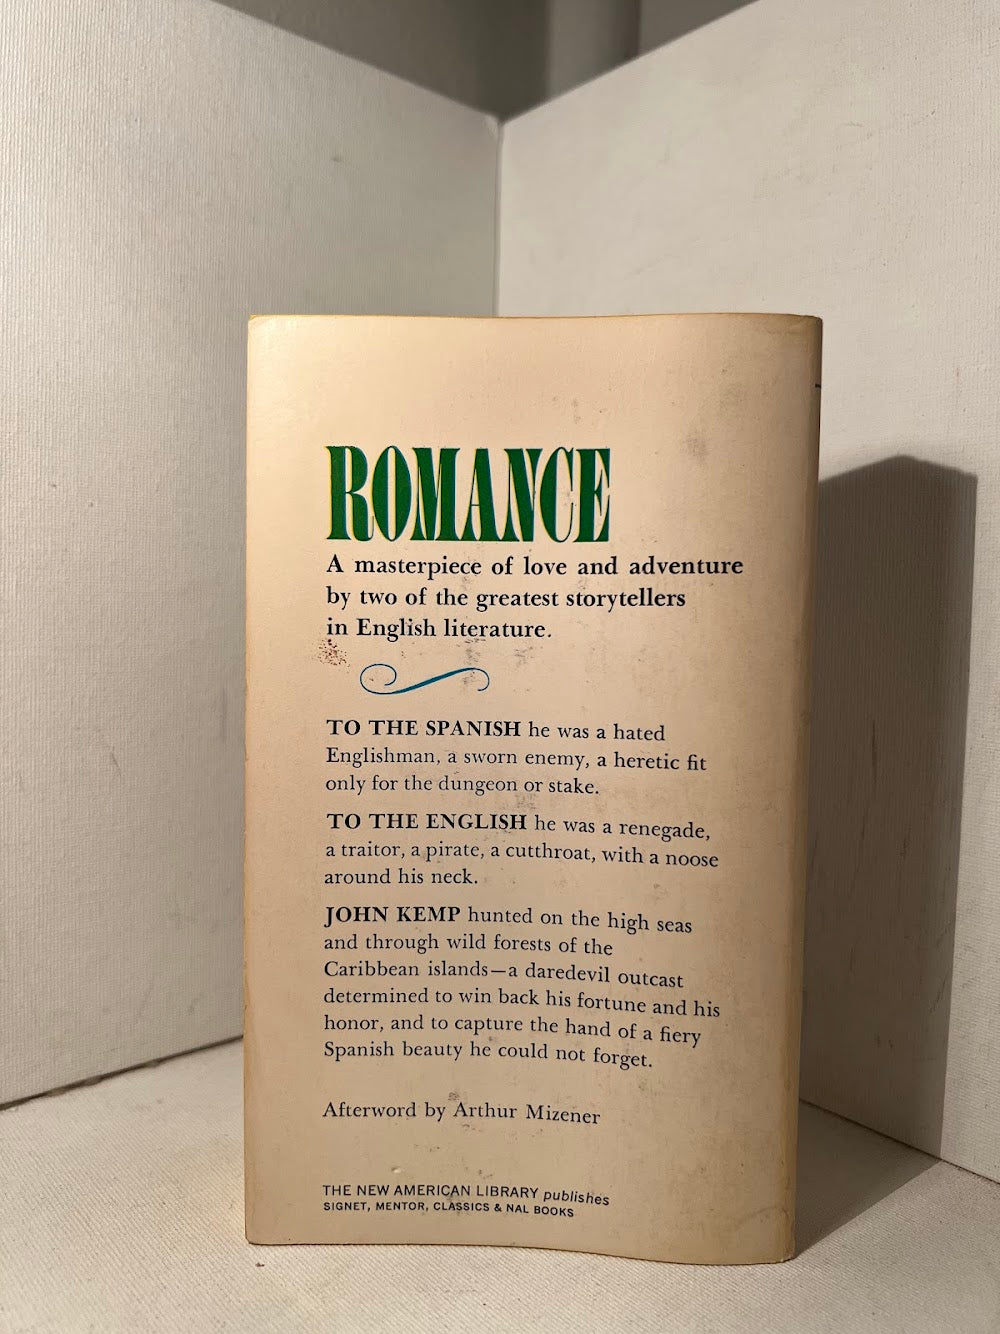 Romance by Joseph Conrad and Ford Maddox Ford